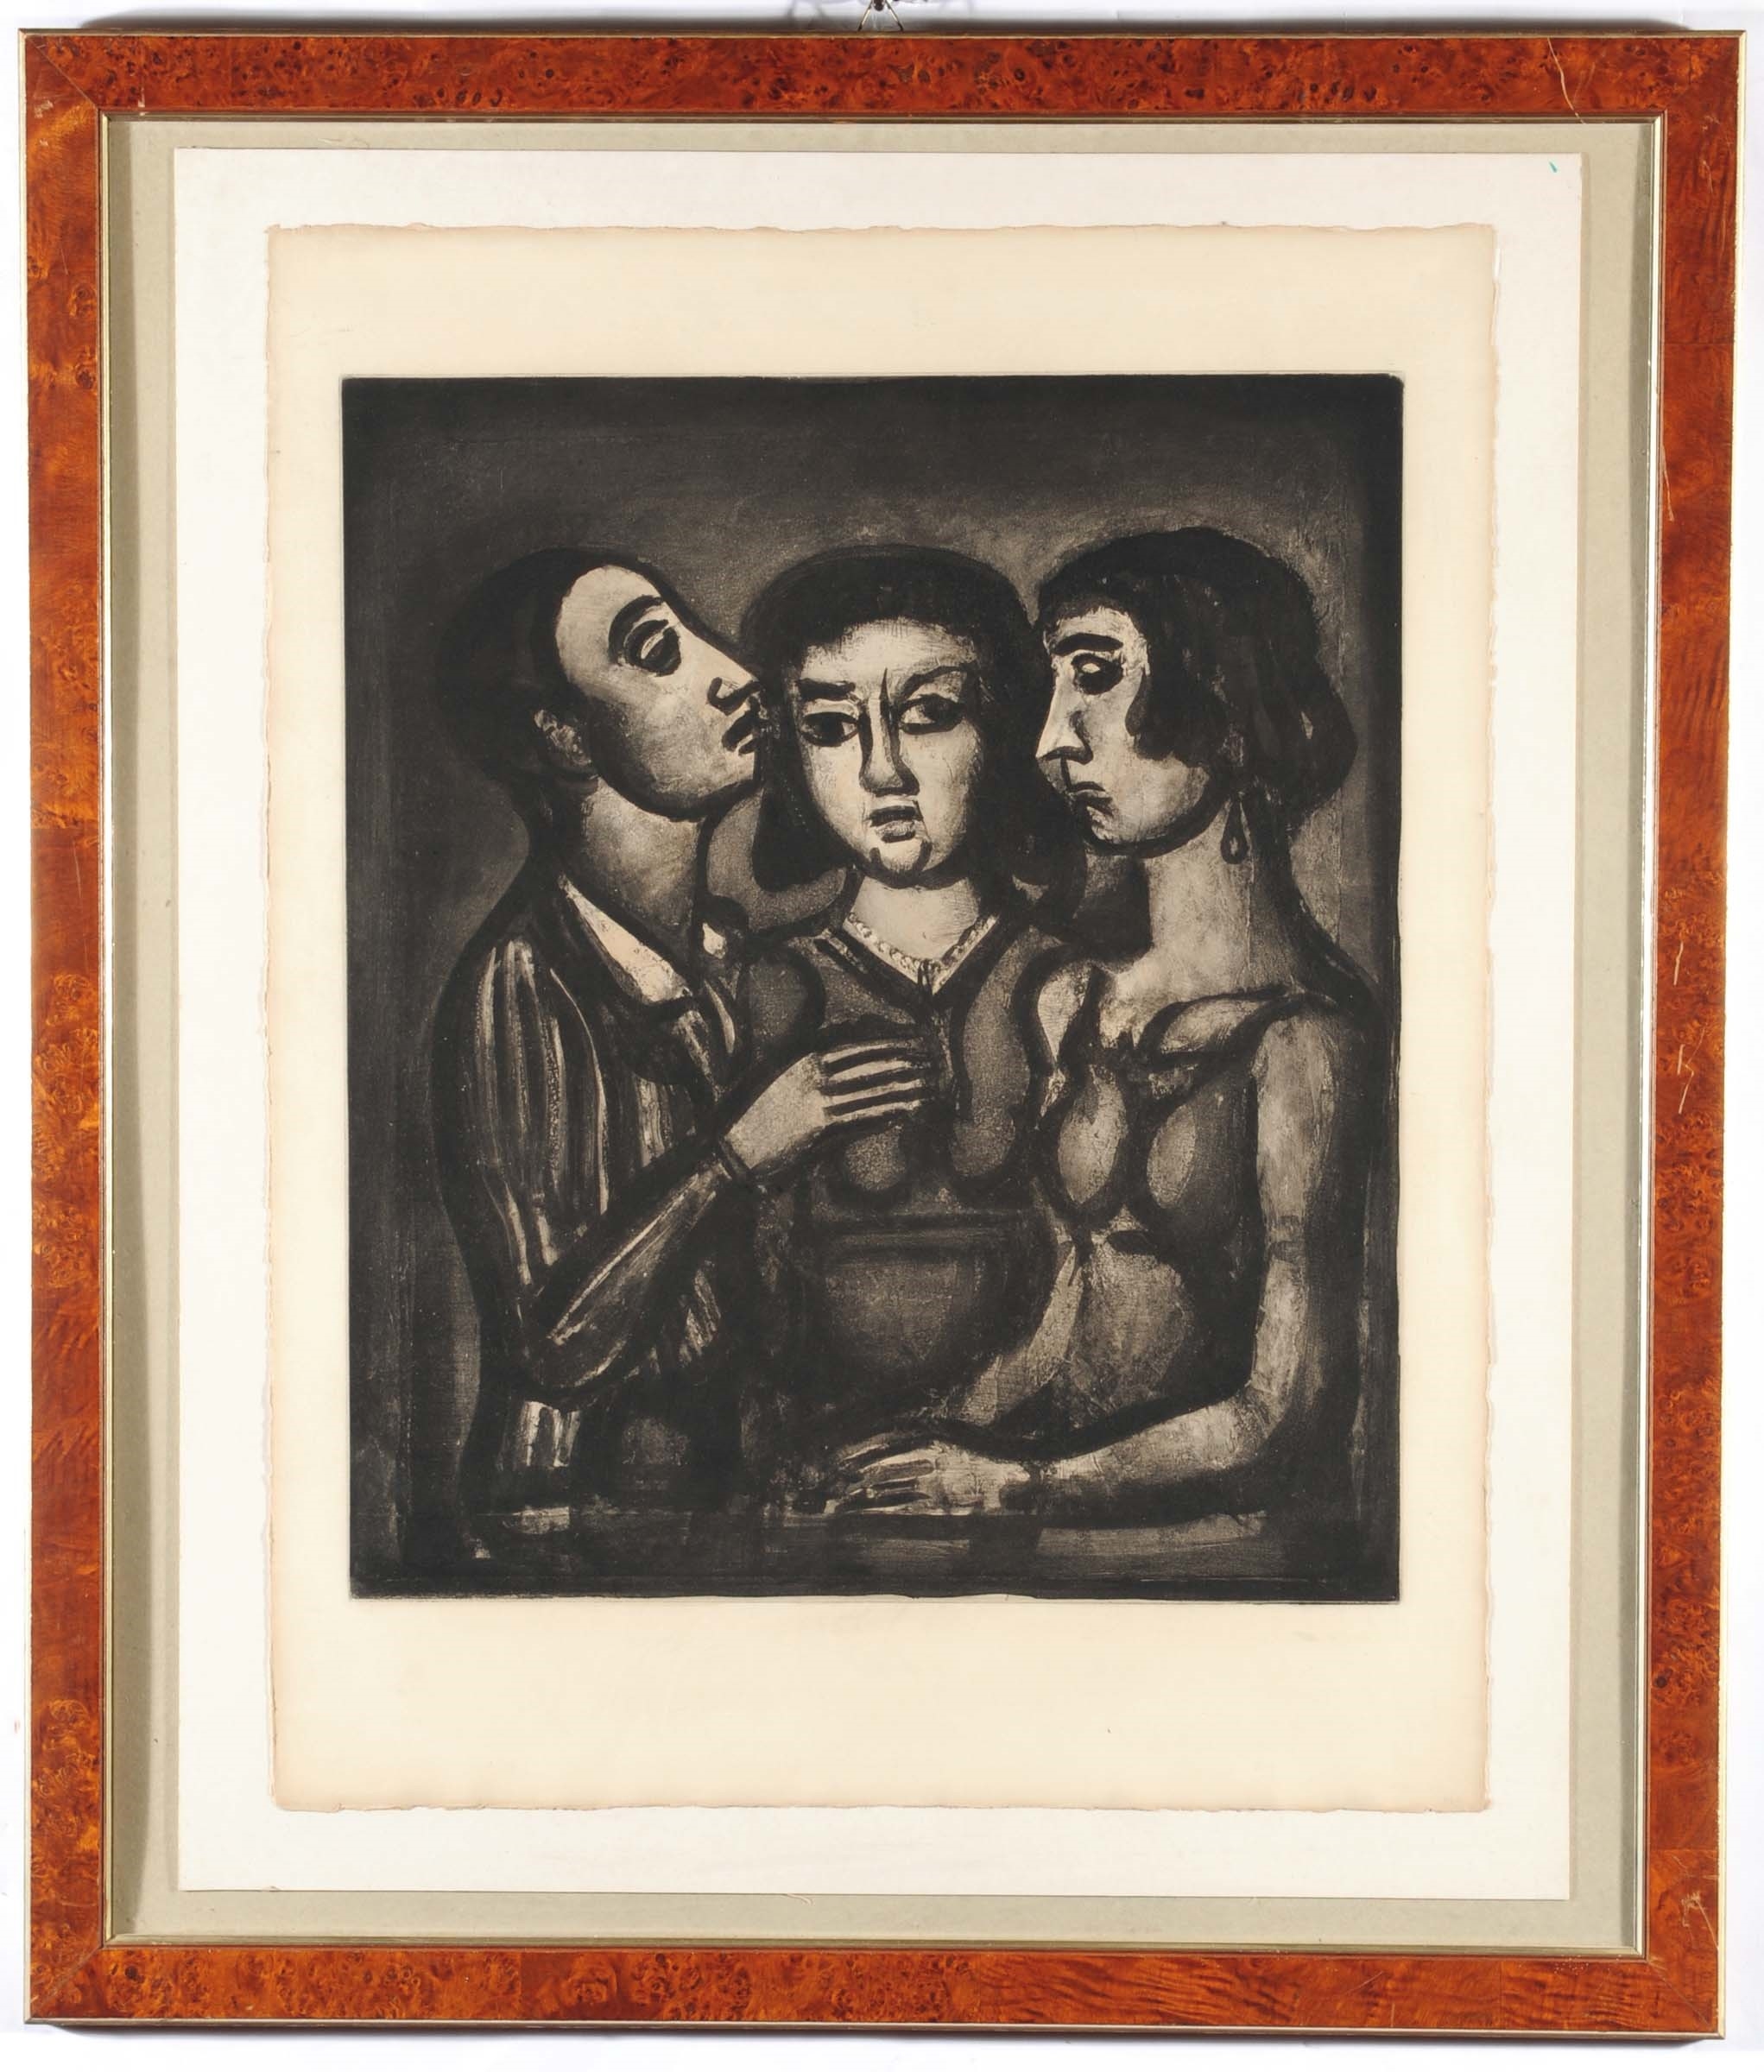 Augures by Georges Rouault, 1923